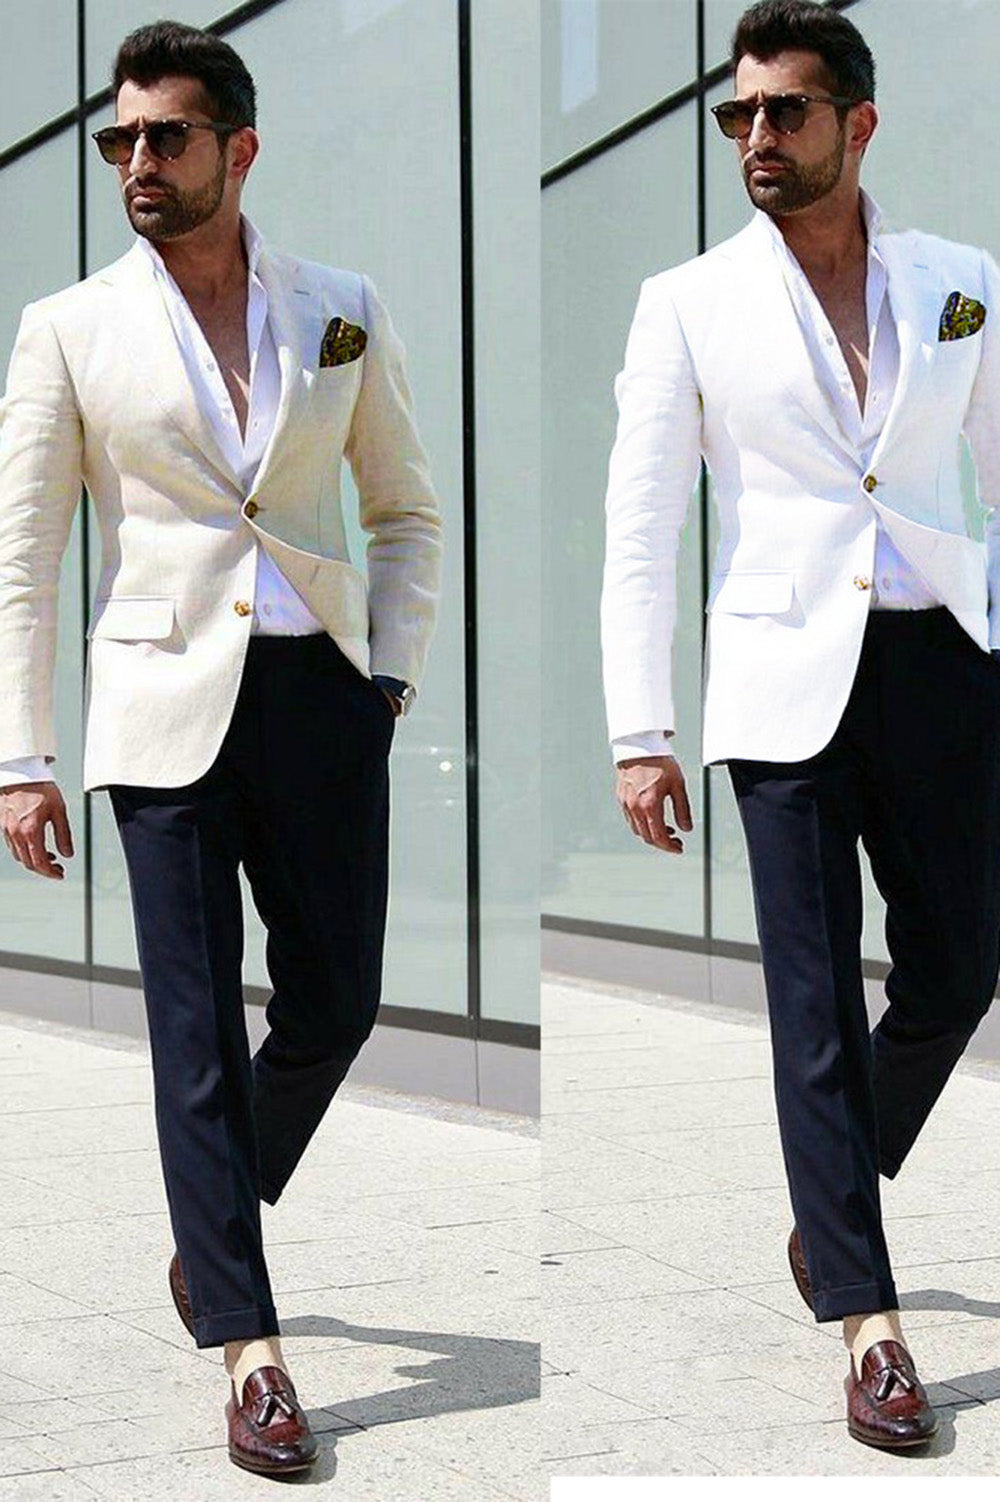 Blazer Outfits For Men 19 Looks That Are Stylish Not Stuffy